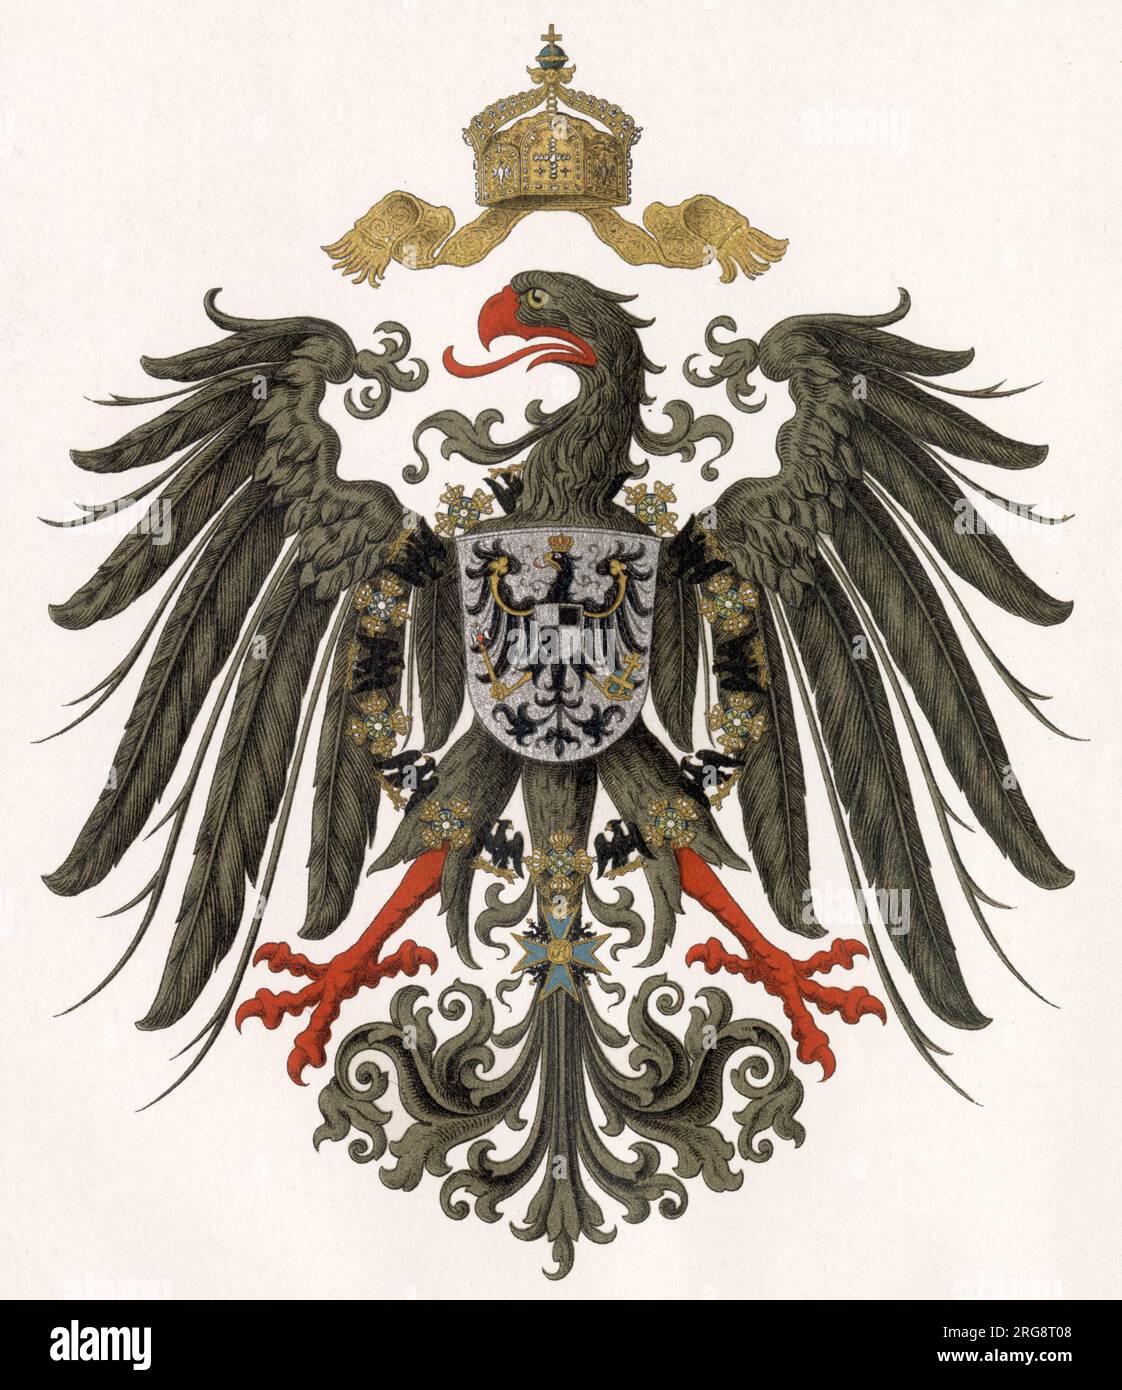 The Reichsadler - the 'state eagle' of Germany - proudly rears its head, over which the imperial crown of Charlemagne hovers. Stock Photo